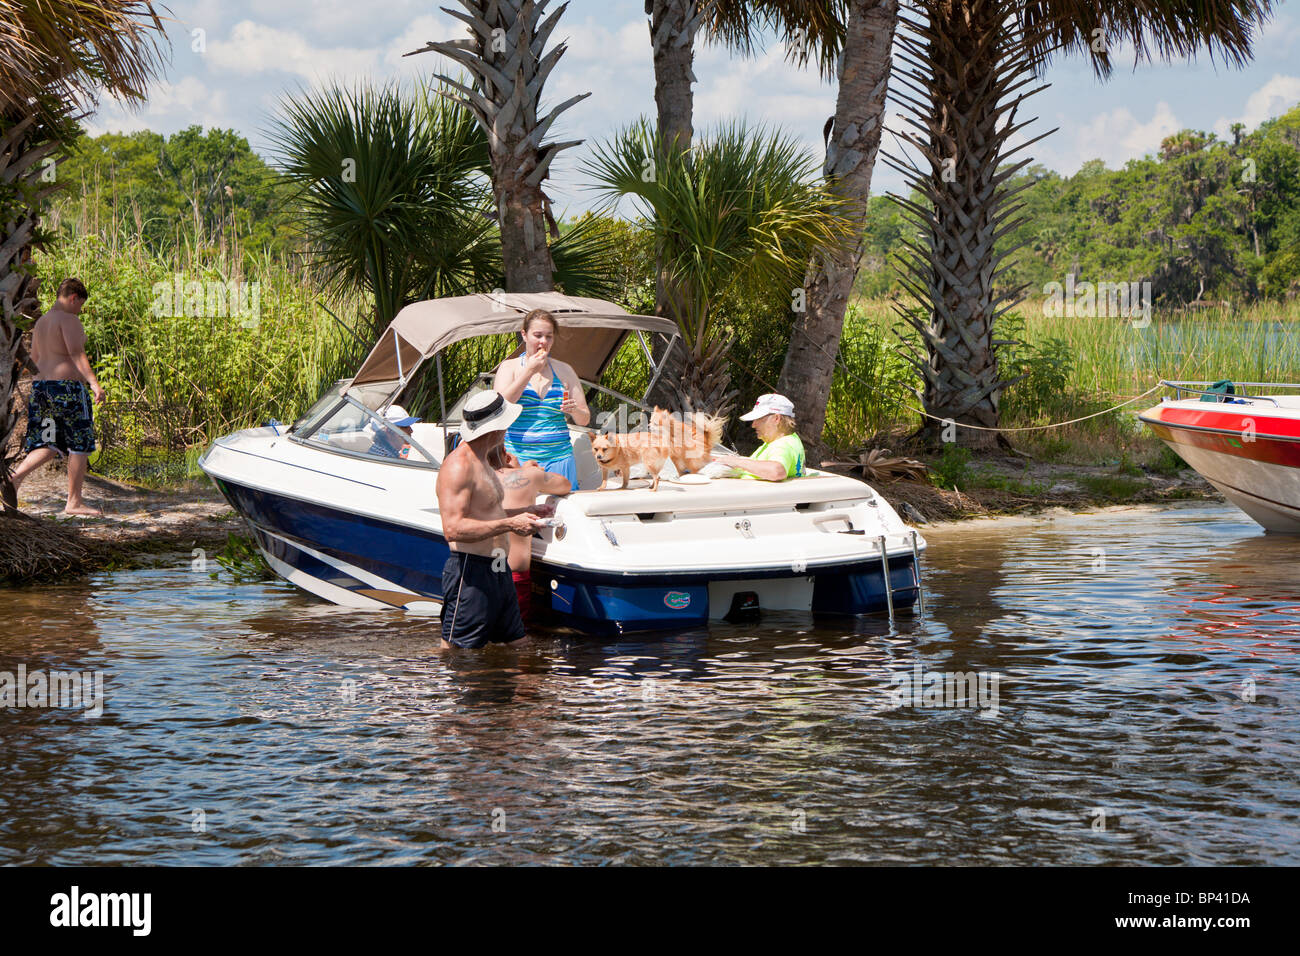 Salt Springs, FL - May 2010 - Family with dog takes a break from boating along the bank of the Salt River in central Florida Stock Photo